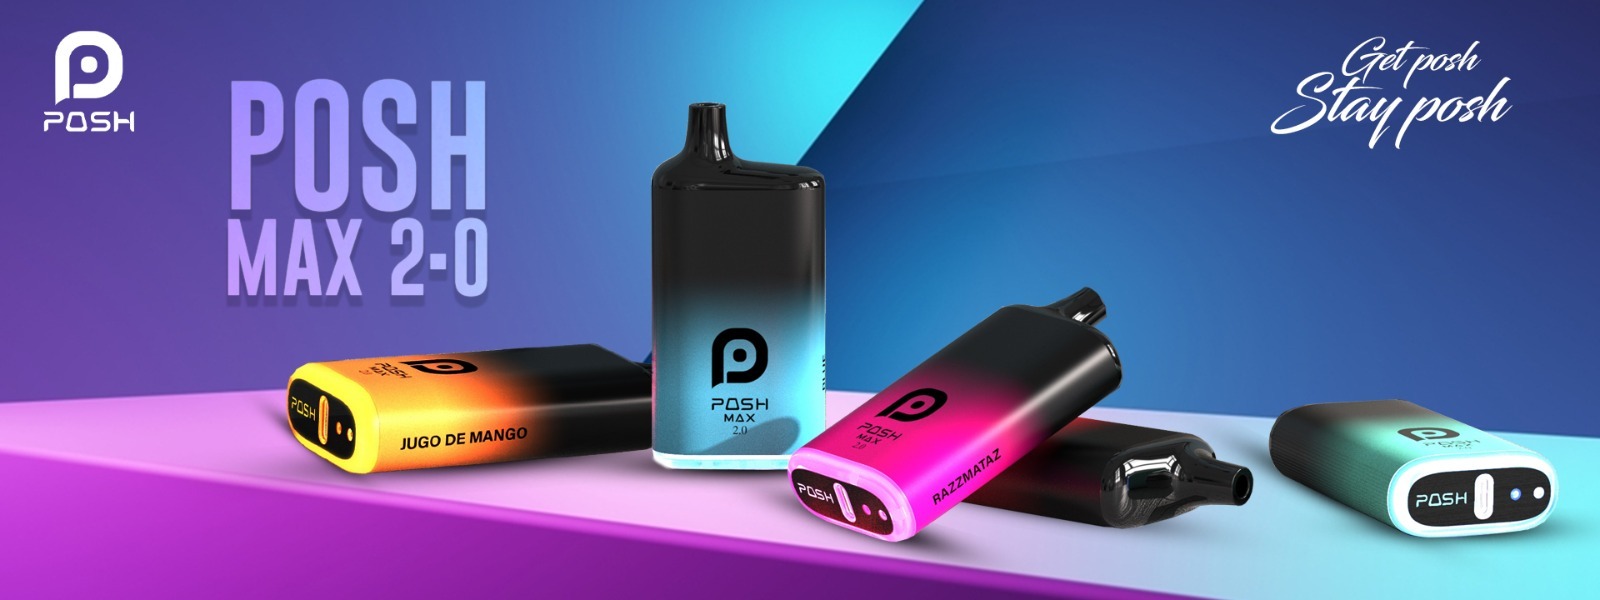 Take advantage of this opportunity and own Posh Vape - Posh Max 2.0 and enjoy the ultimate in vaping convenience. Fusion Vape offers free shipping on all orders.